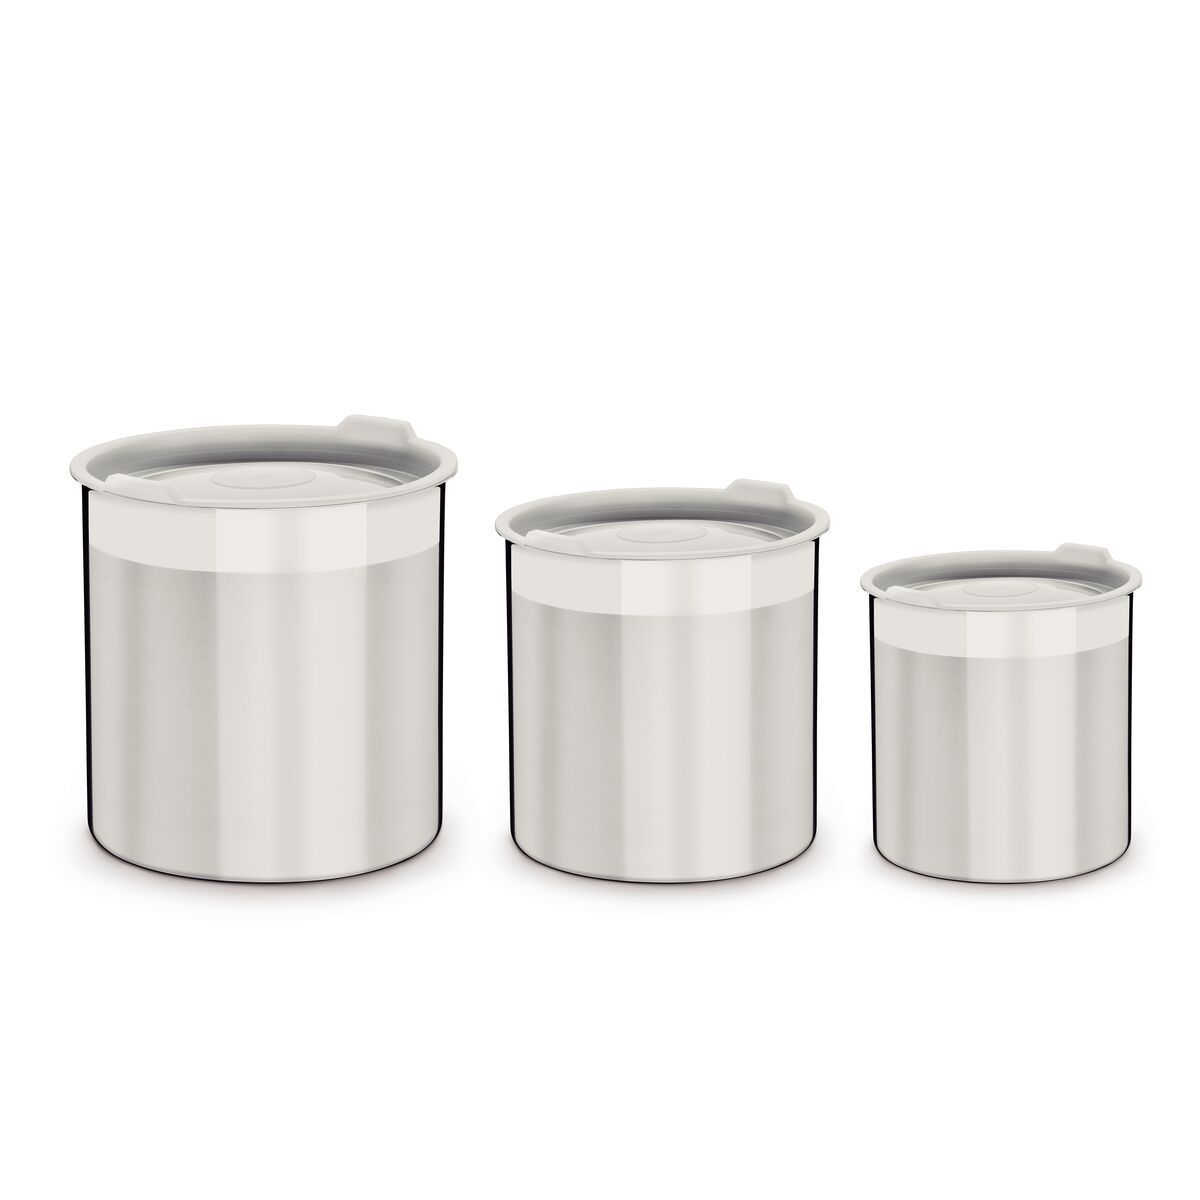 Tramontina Cucina stainless steel container set with white plastic lid, 3 pieces